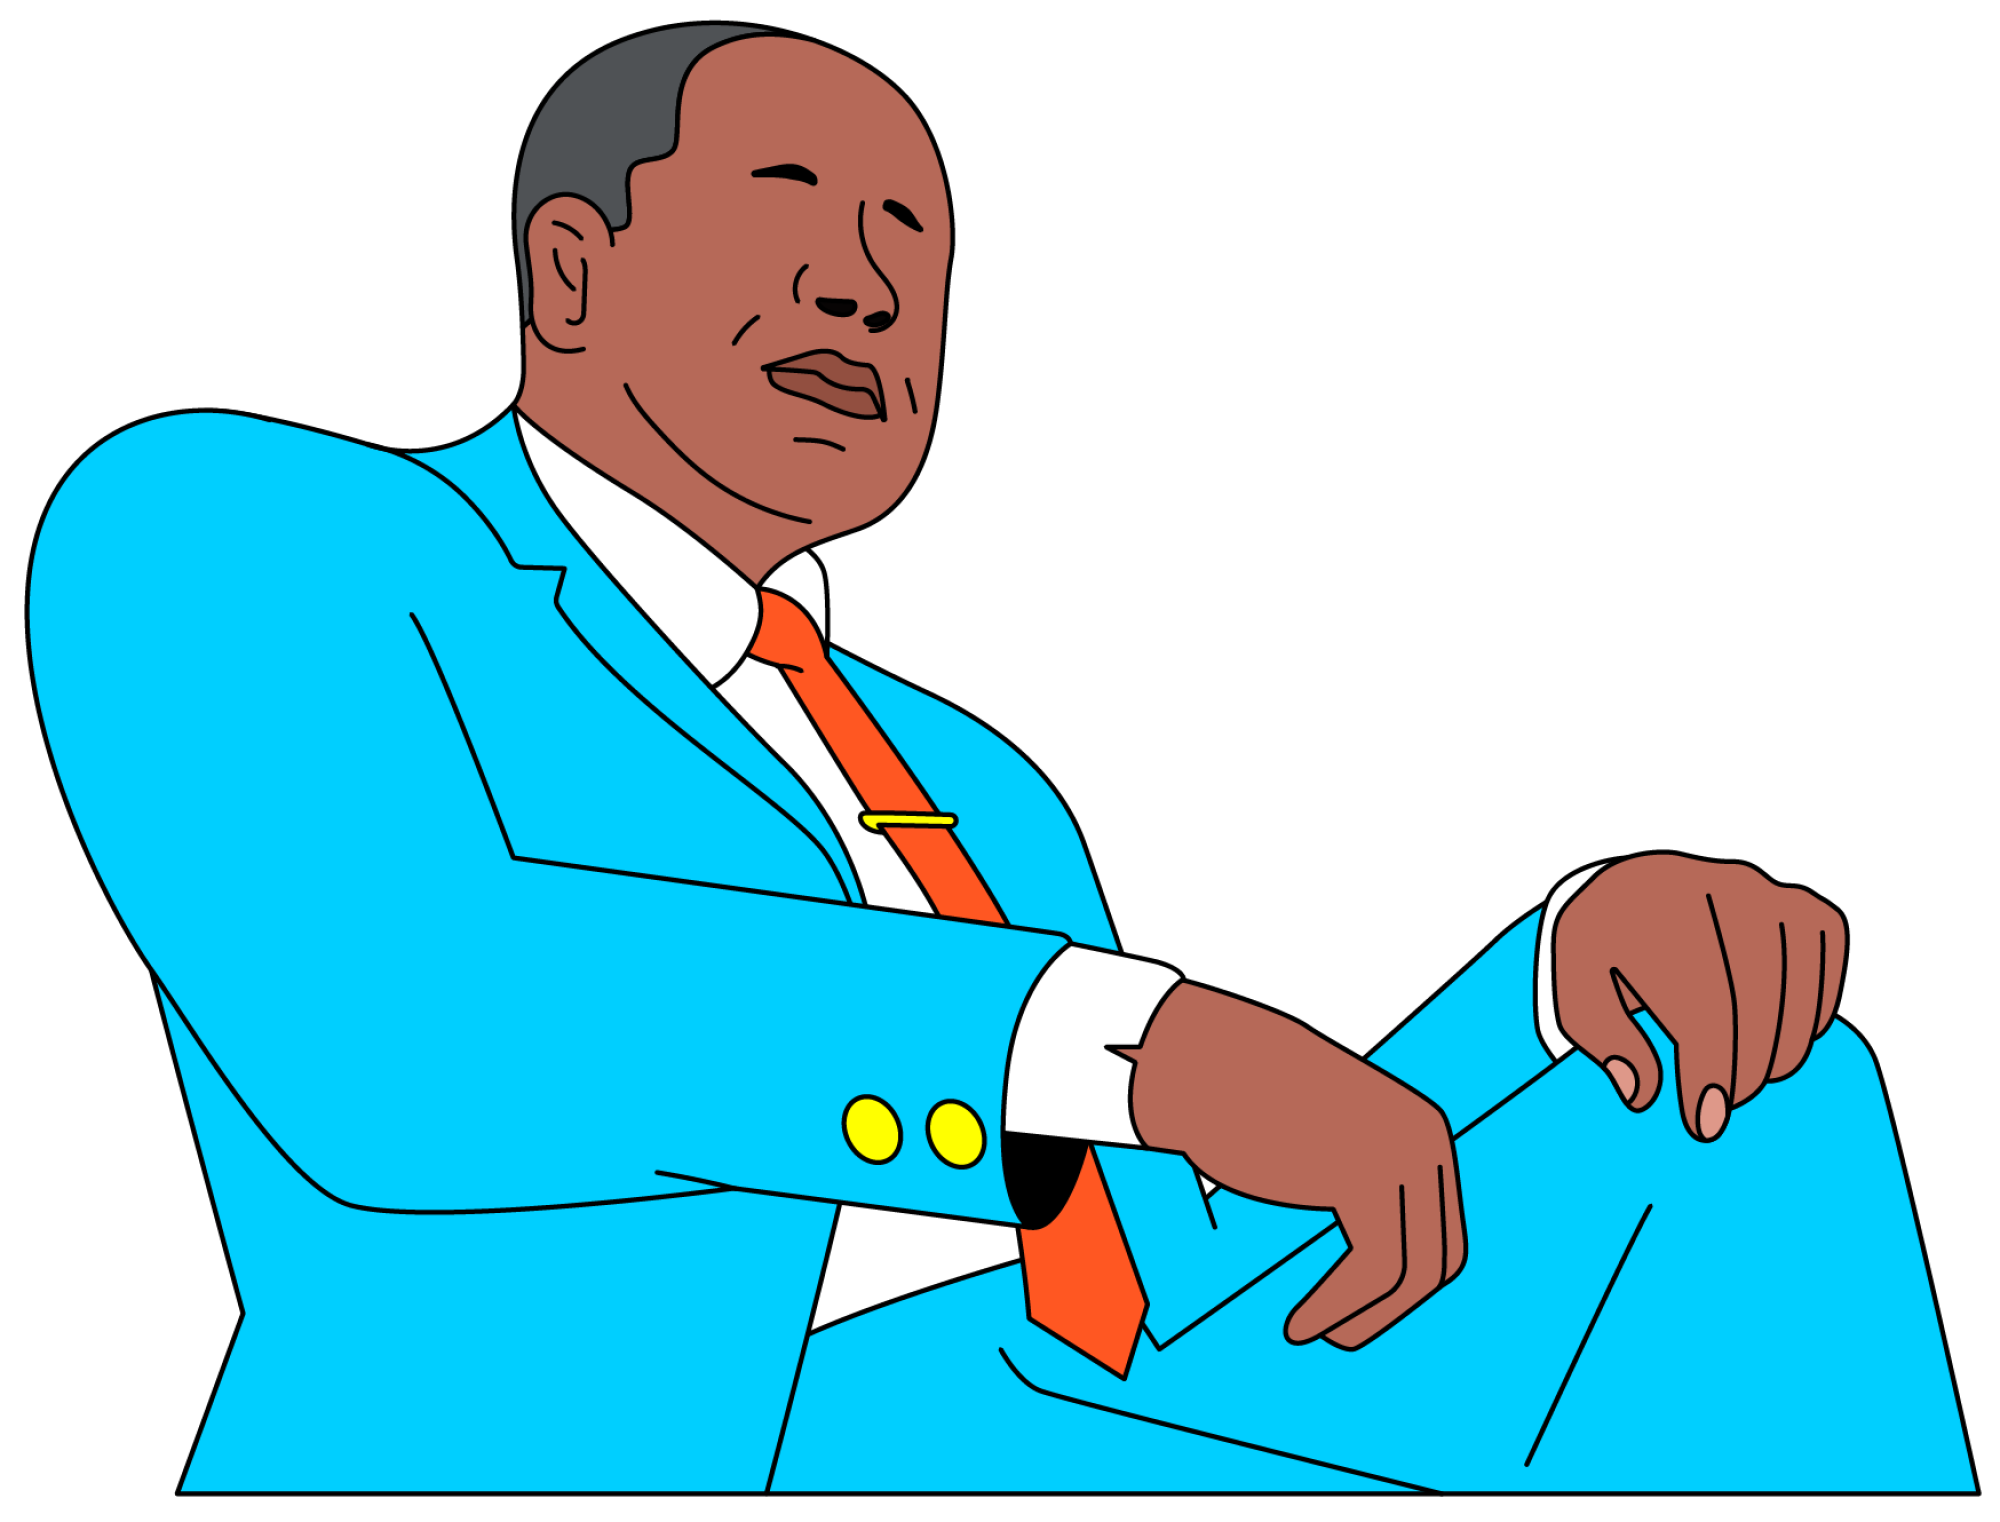 Illustration of Forest Whitaker from "Godfather of Harlem"